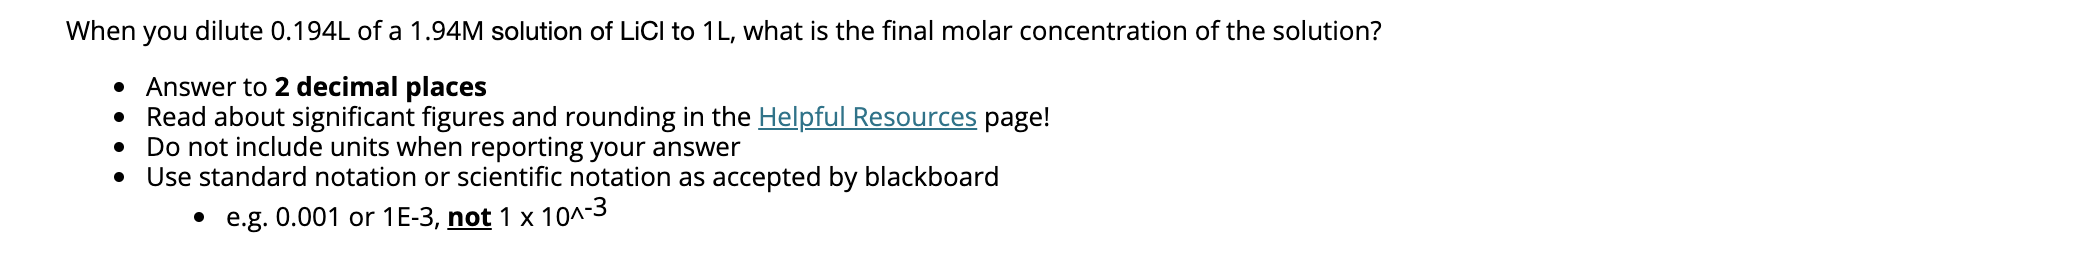 When you dilute 0.194L of a 1.94M solution of LiCI to 1L, what is the final molar concentration of the solution?
• Answer to 2 decimal places
• Read about significant figures and rounding in the Helpful Resources page!
Do not include units when reporting your answer
Use standard notation or scientific notation as accepted by blackboard
• e.g. 0.001 or 1E-3, not 1 x 10^-3
